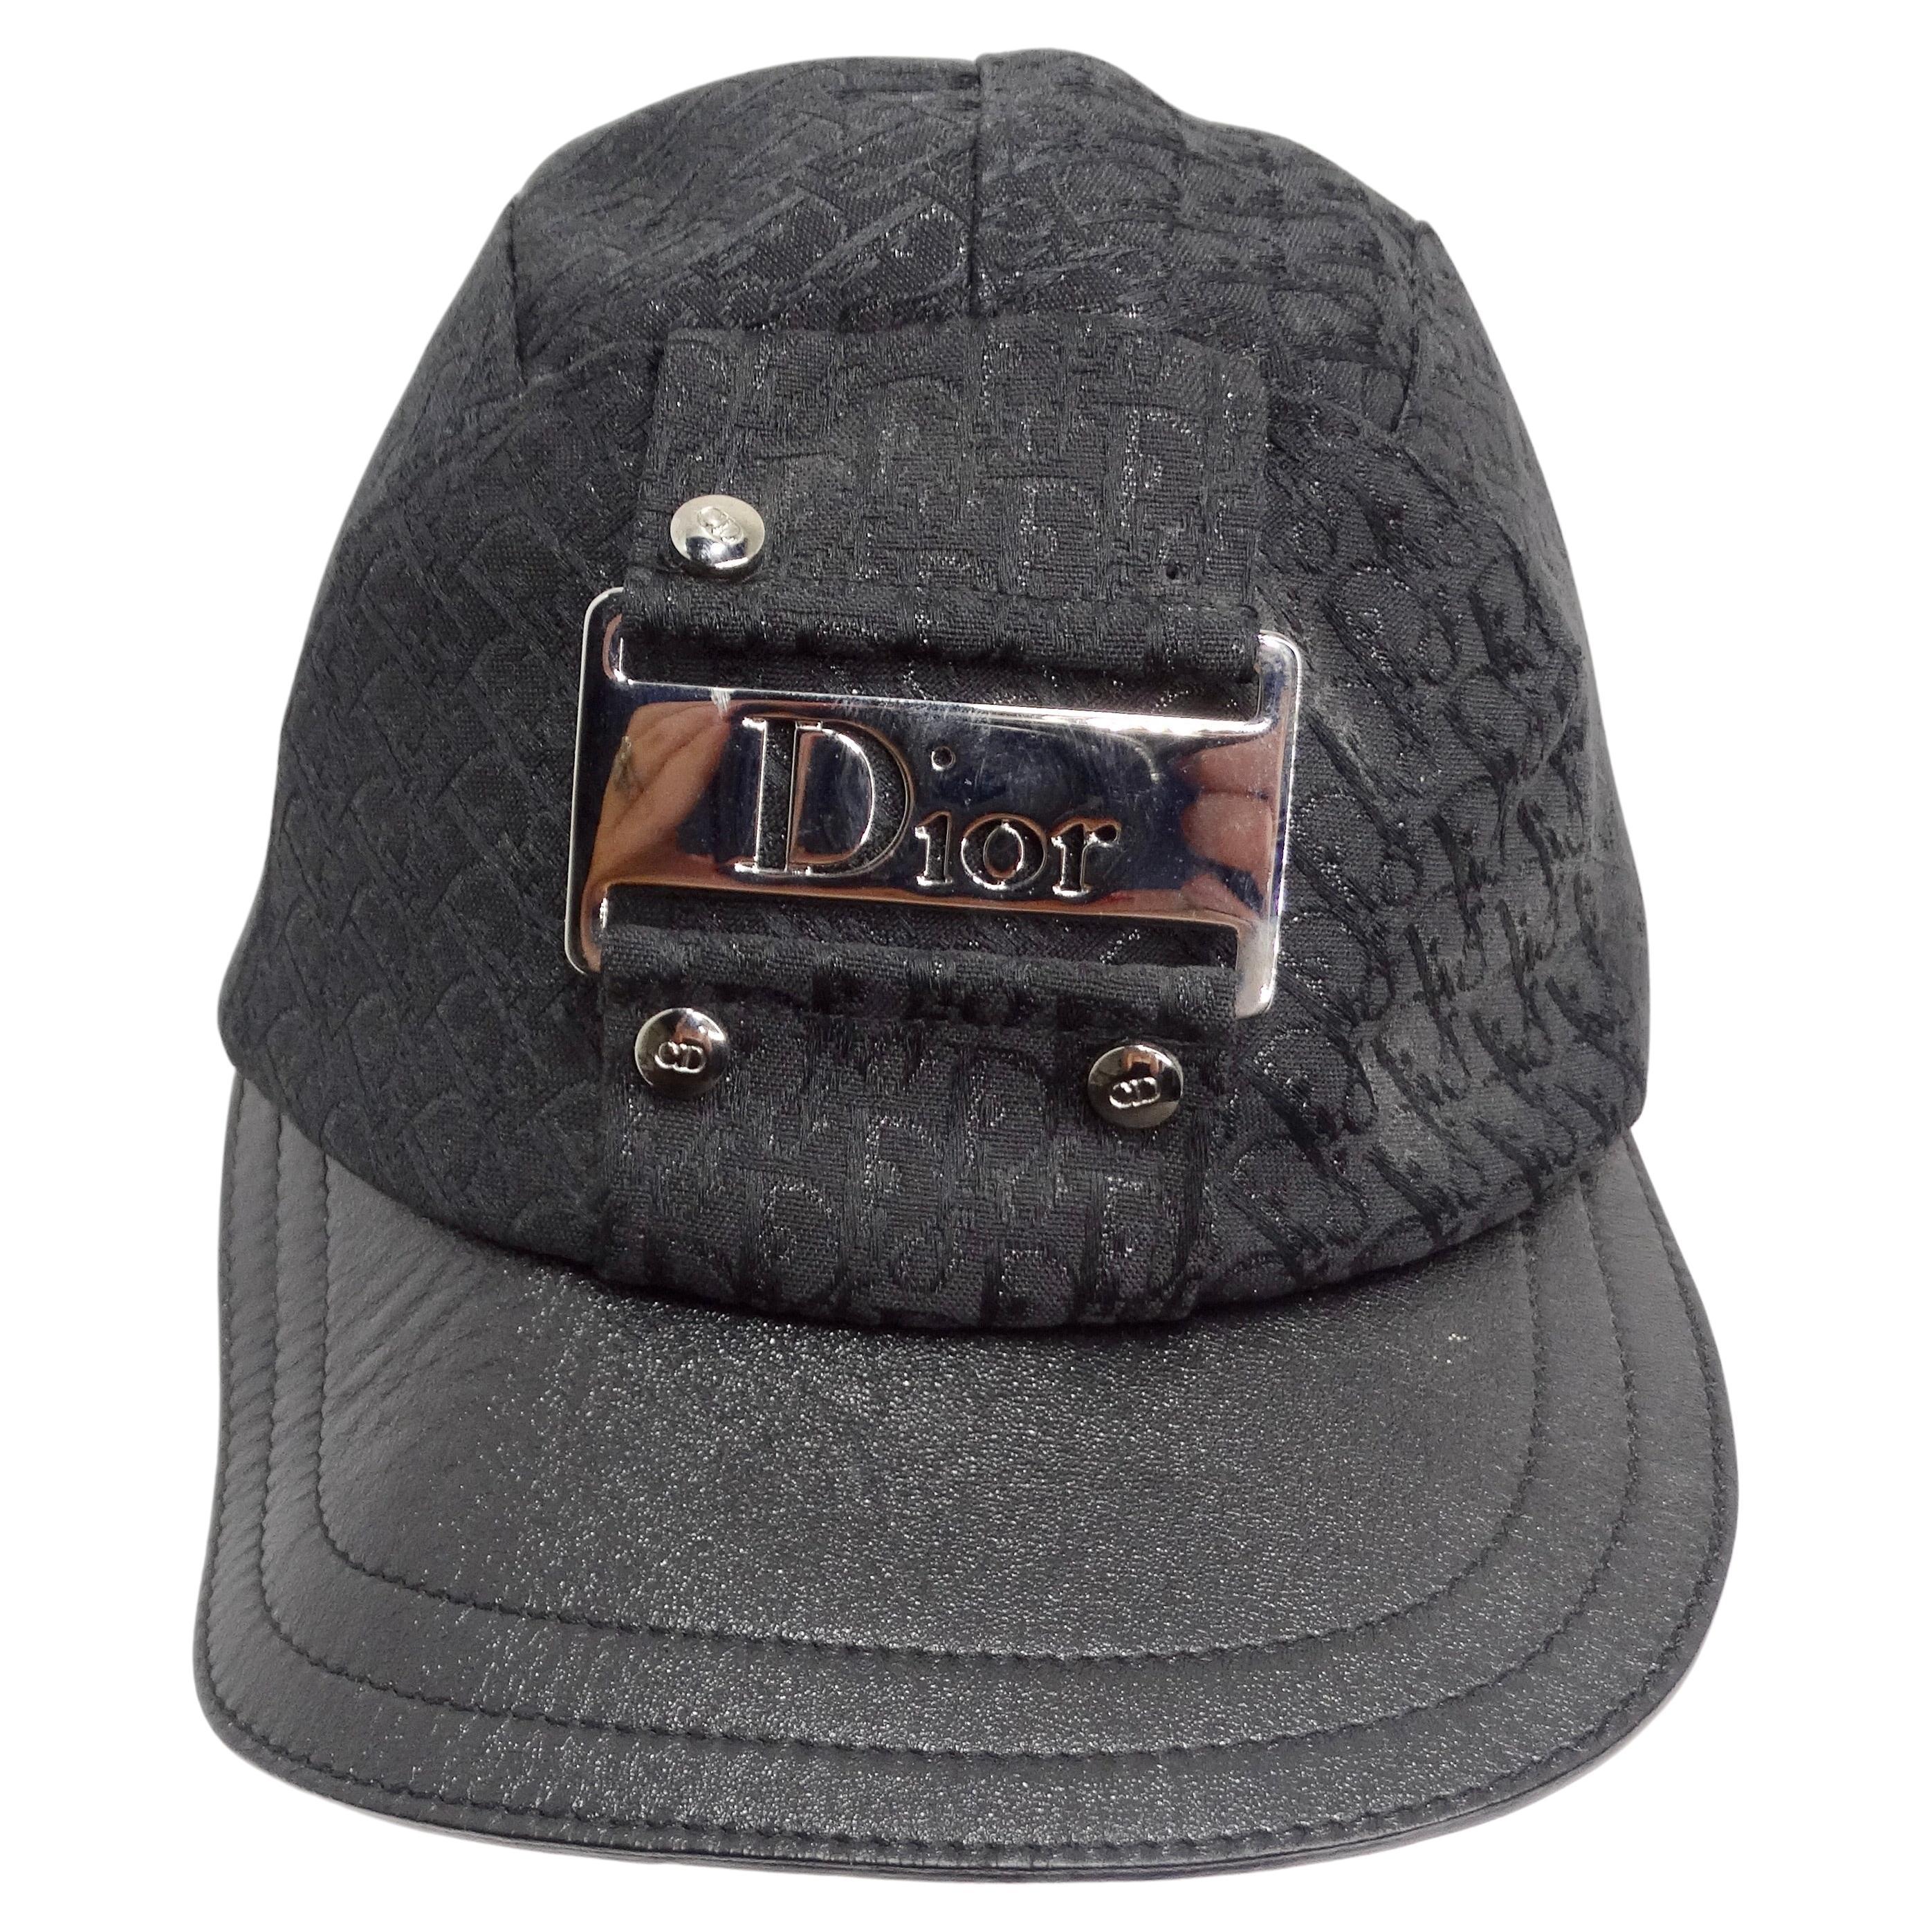 Christian Dior by John Galliano 2002 Trotter Monogram Baseball Cap In Excellent Condition For Sale In Scottsdale, AZ